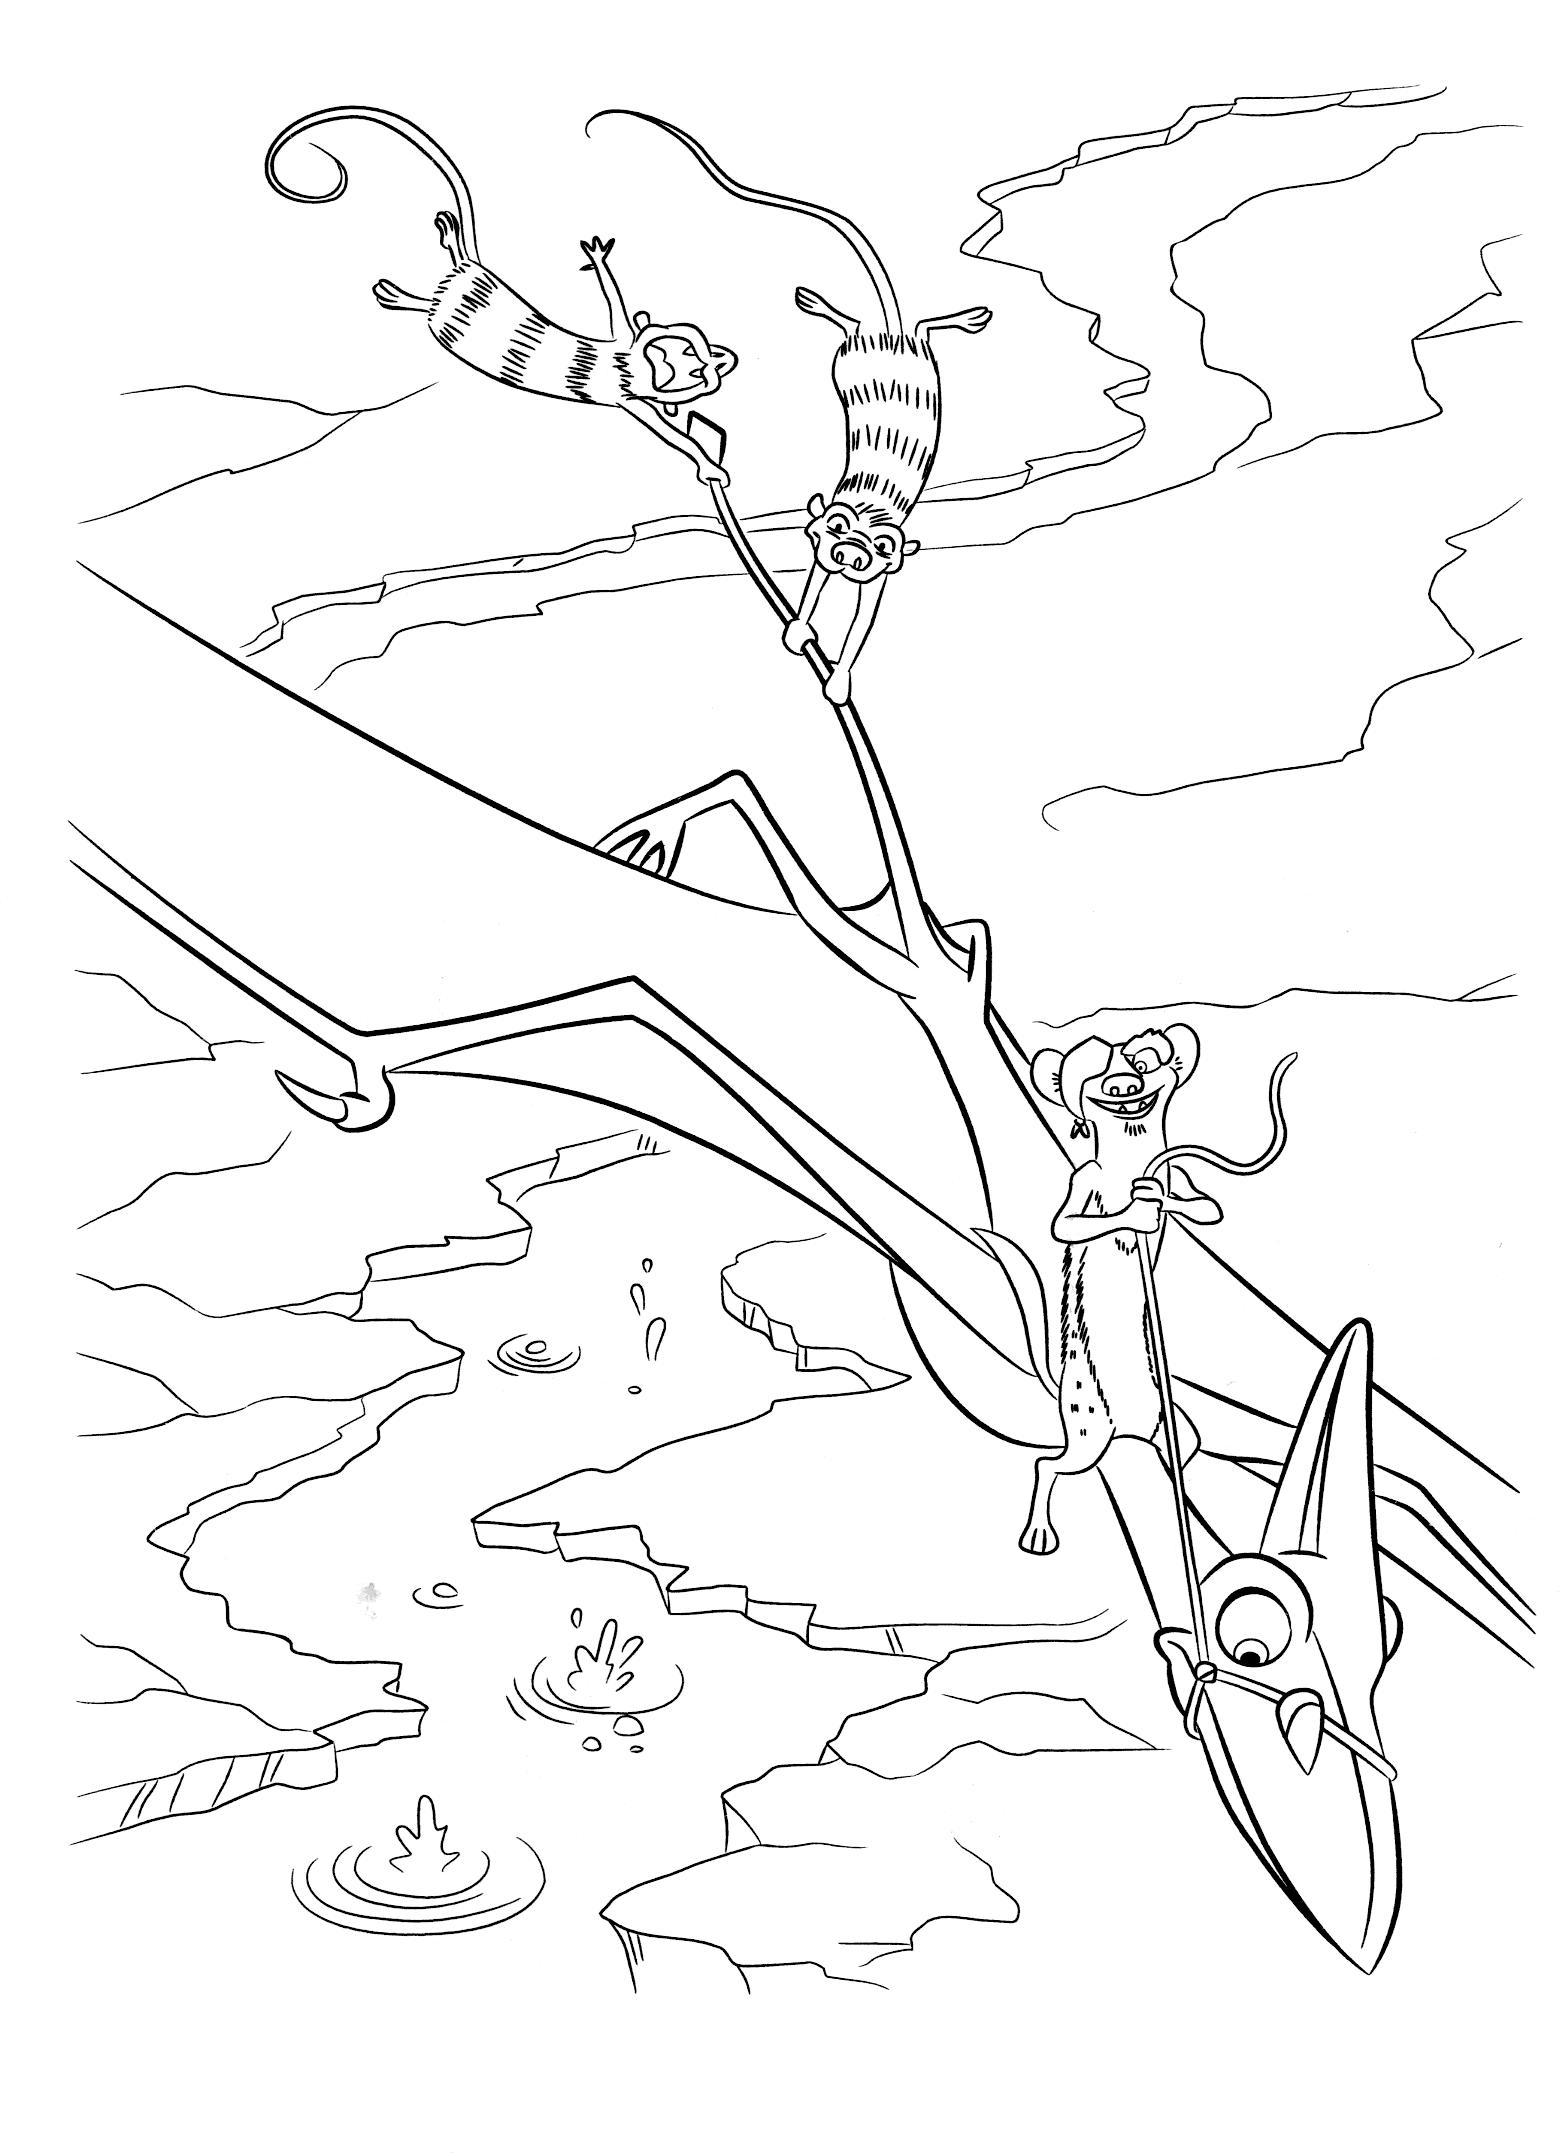 You can download and print out the coloring pages for kids Buck and opossum...